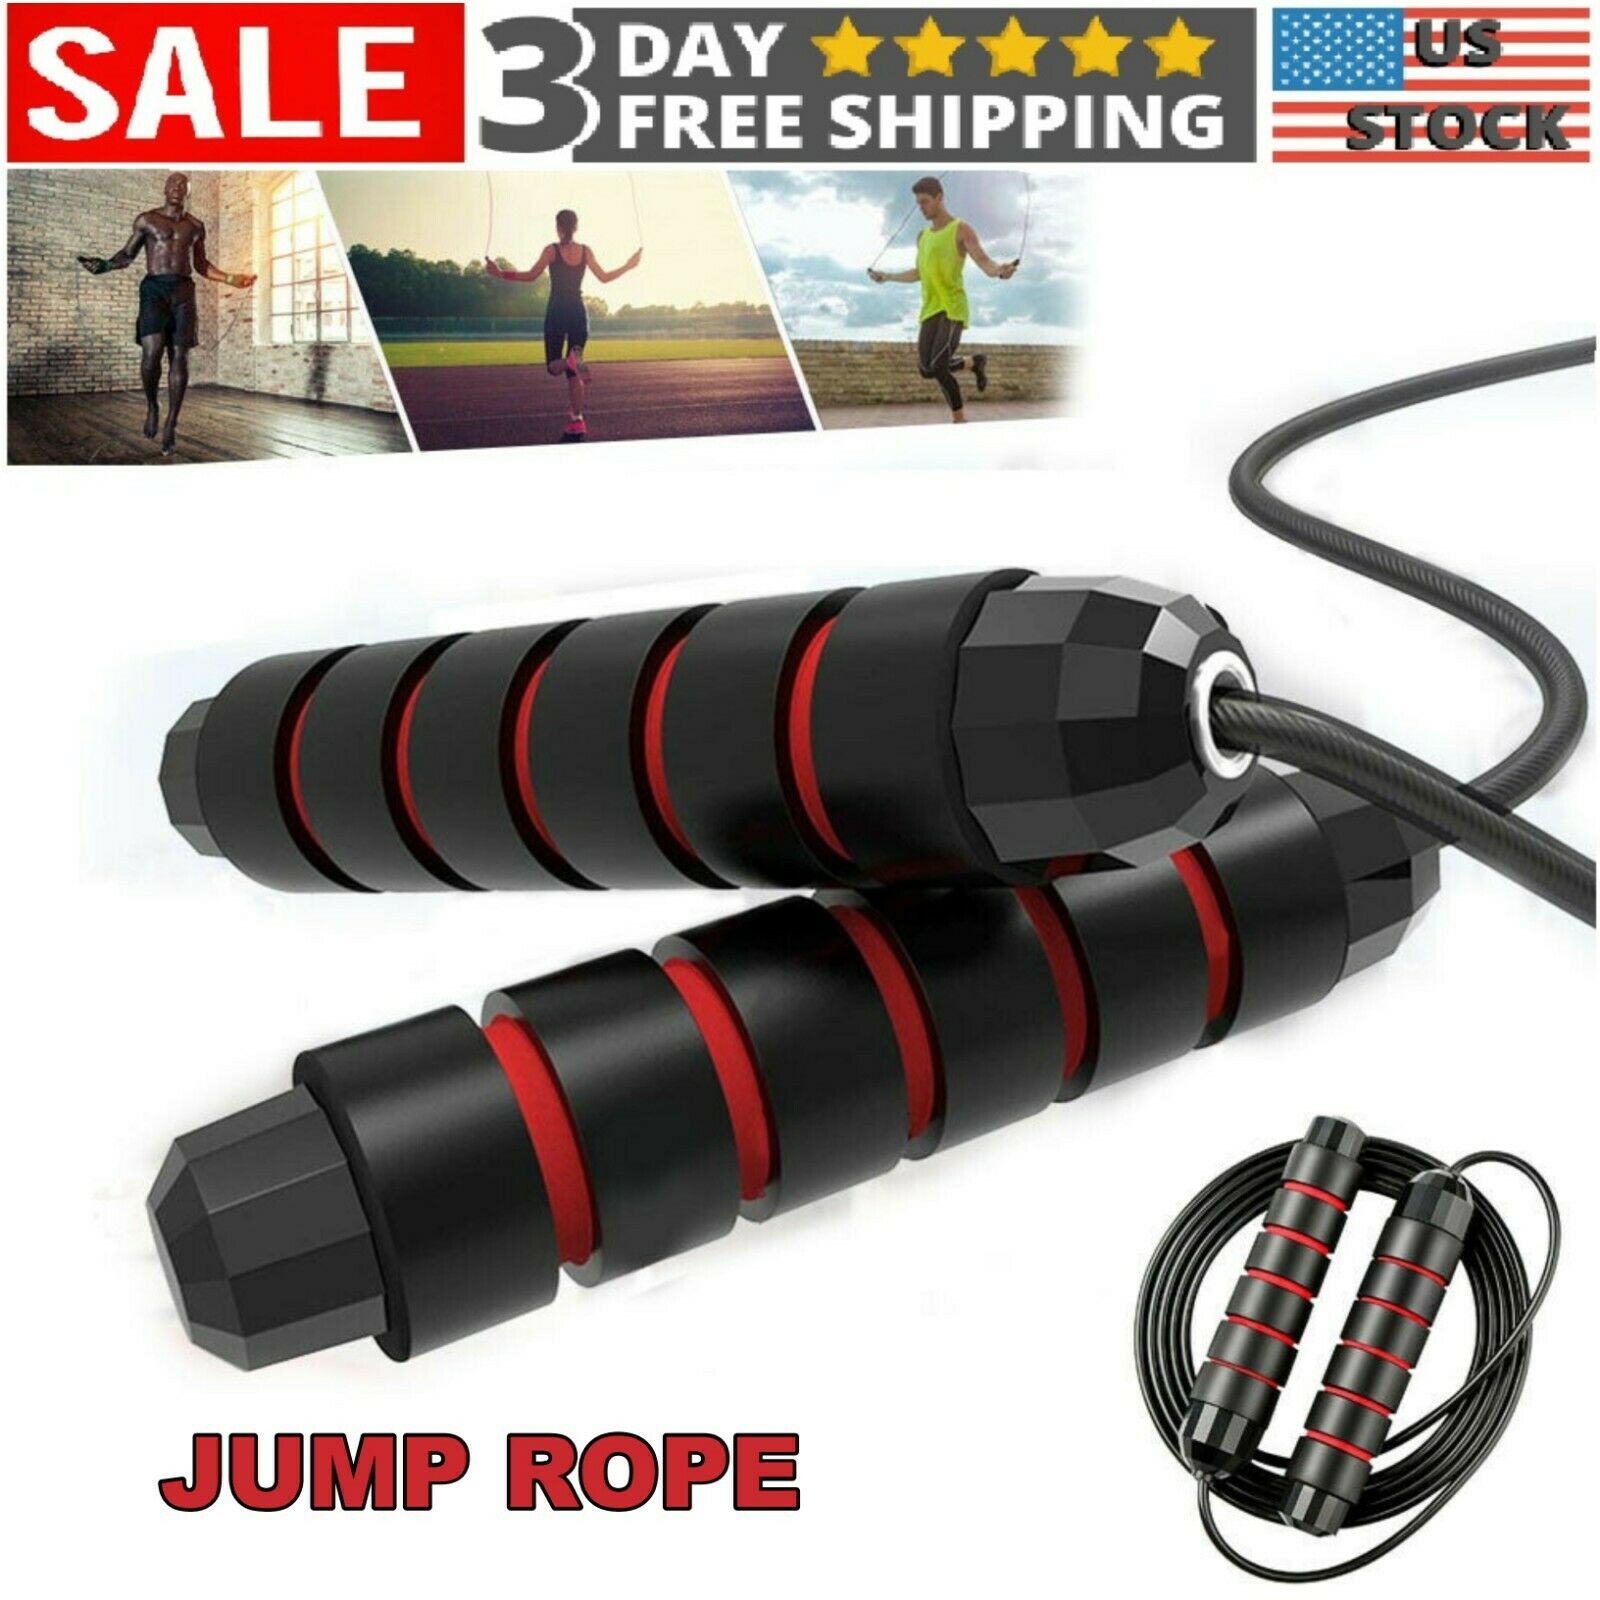 Jump Rope Boxing Skipping Aerobic Exercise Fitness Jumping Rope Adjustable Speed